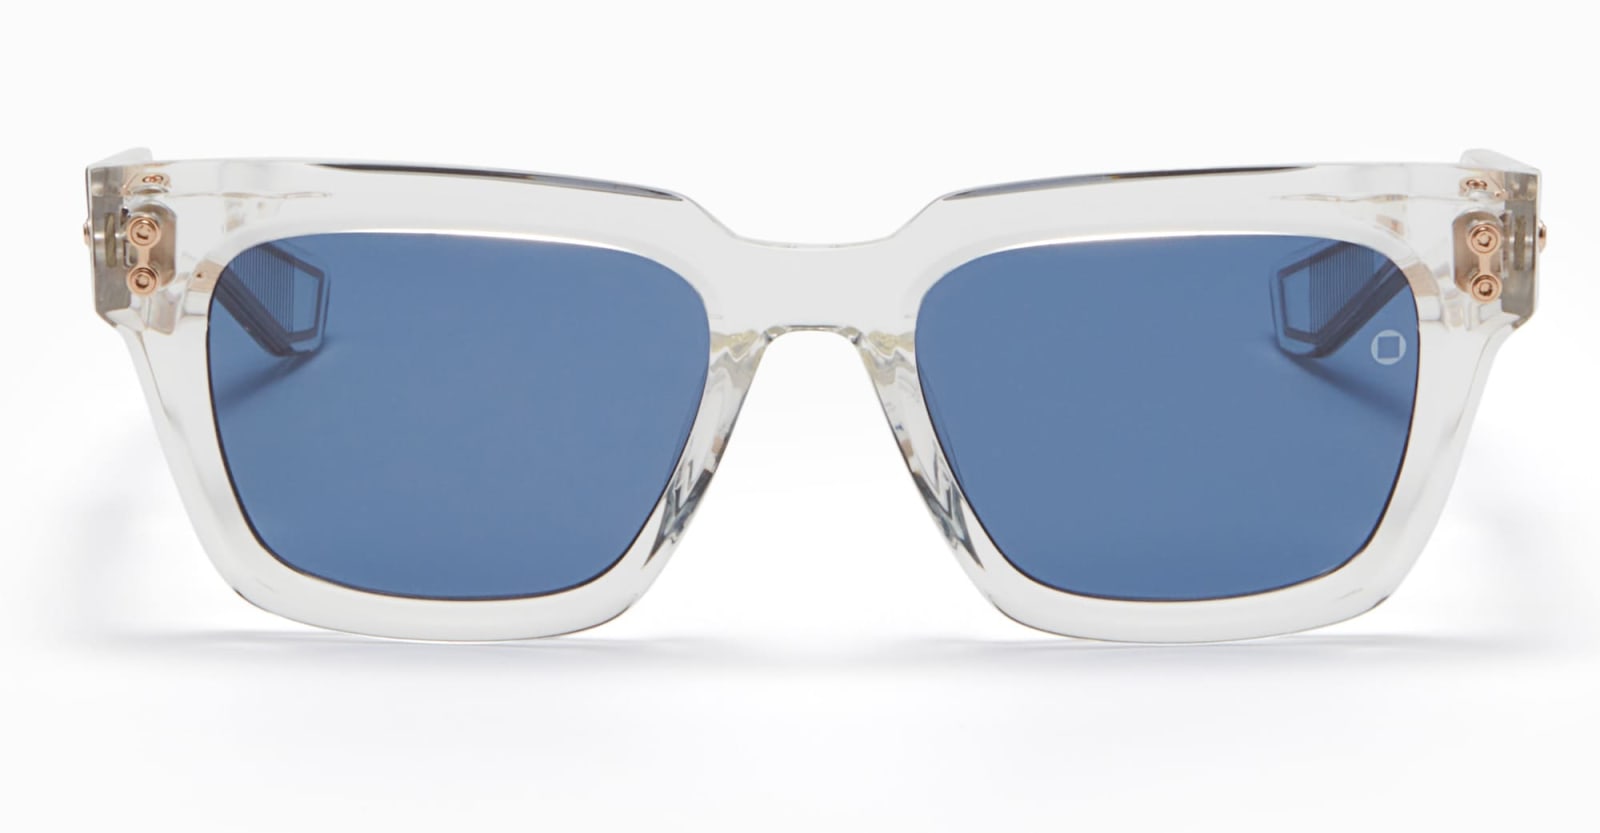 Pyxis - Crystal Clear / White Gold Sunglasses